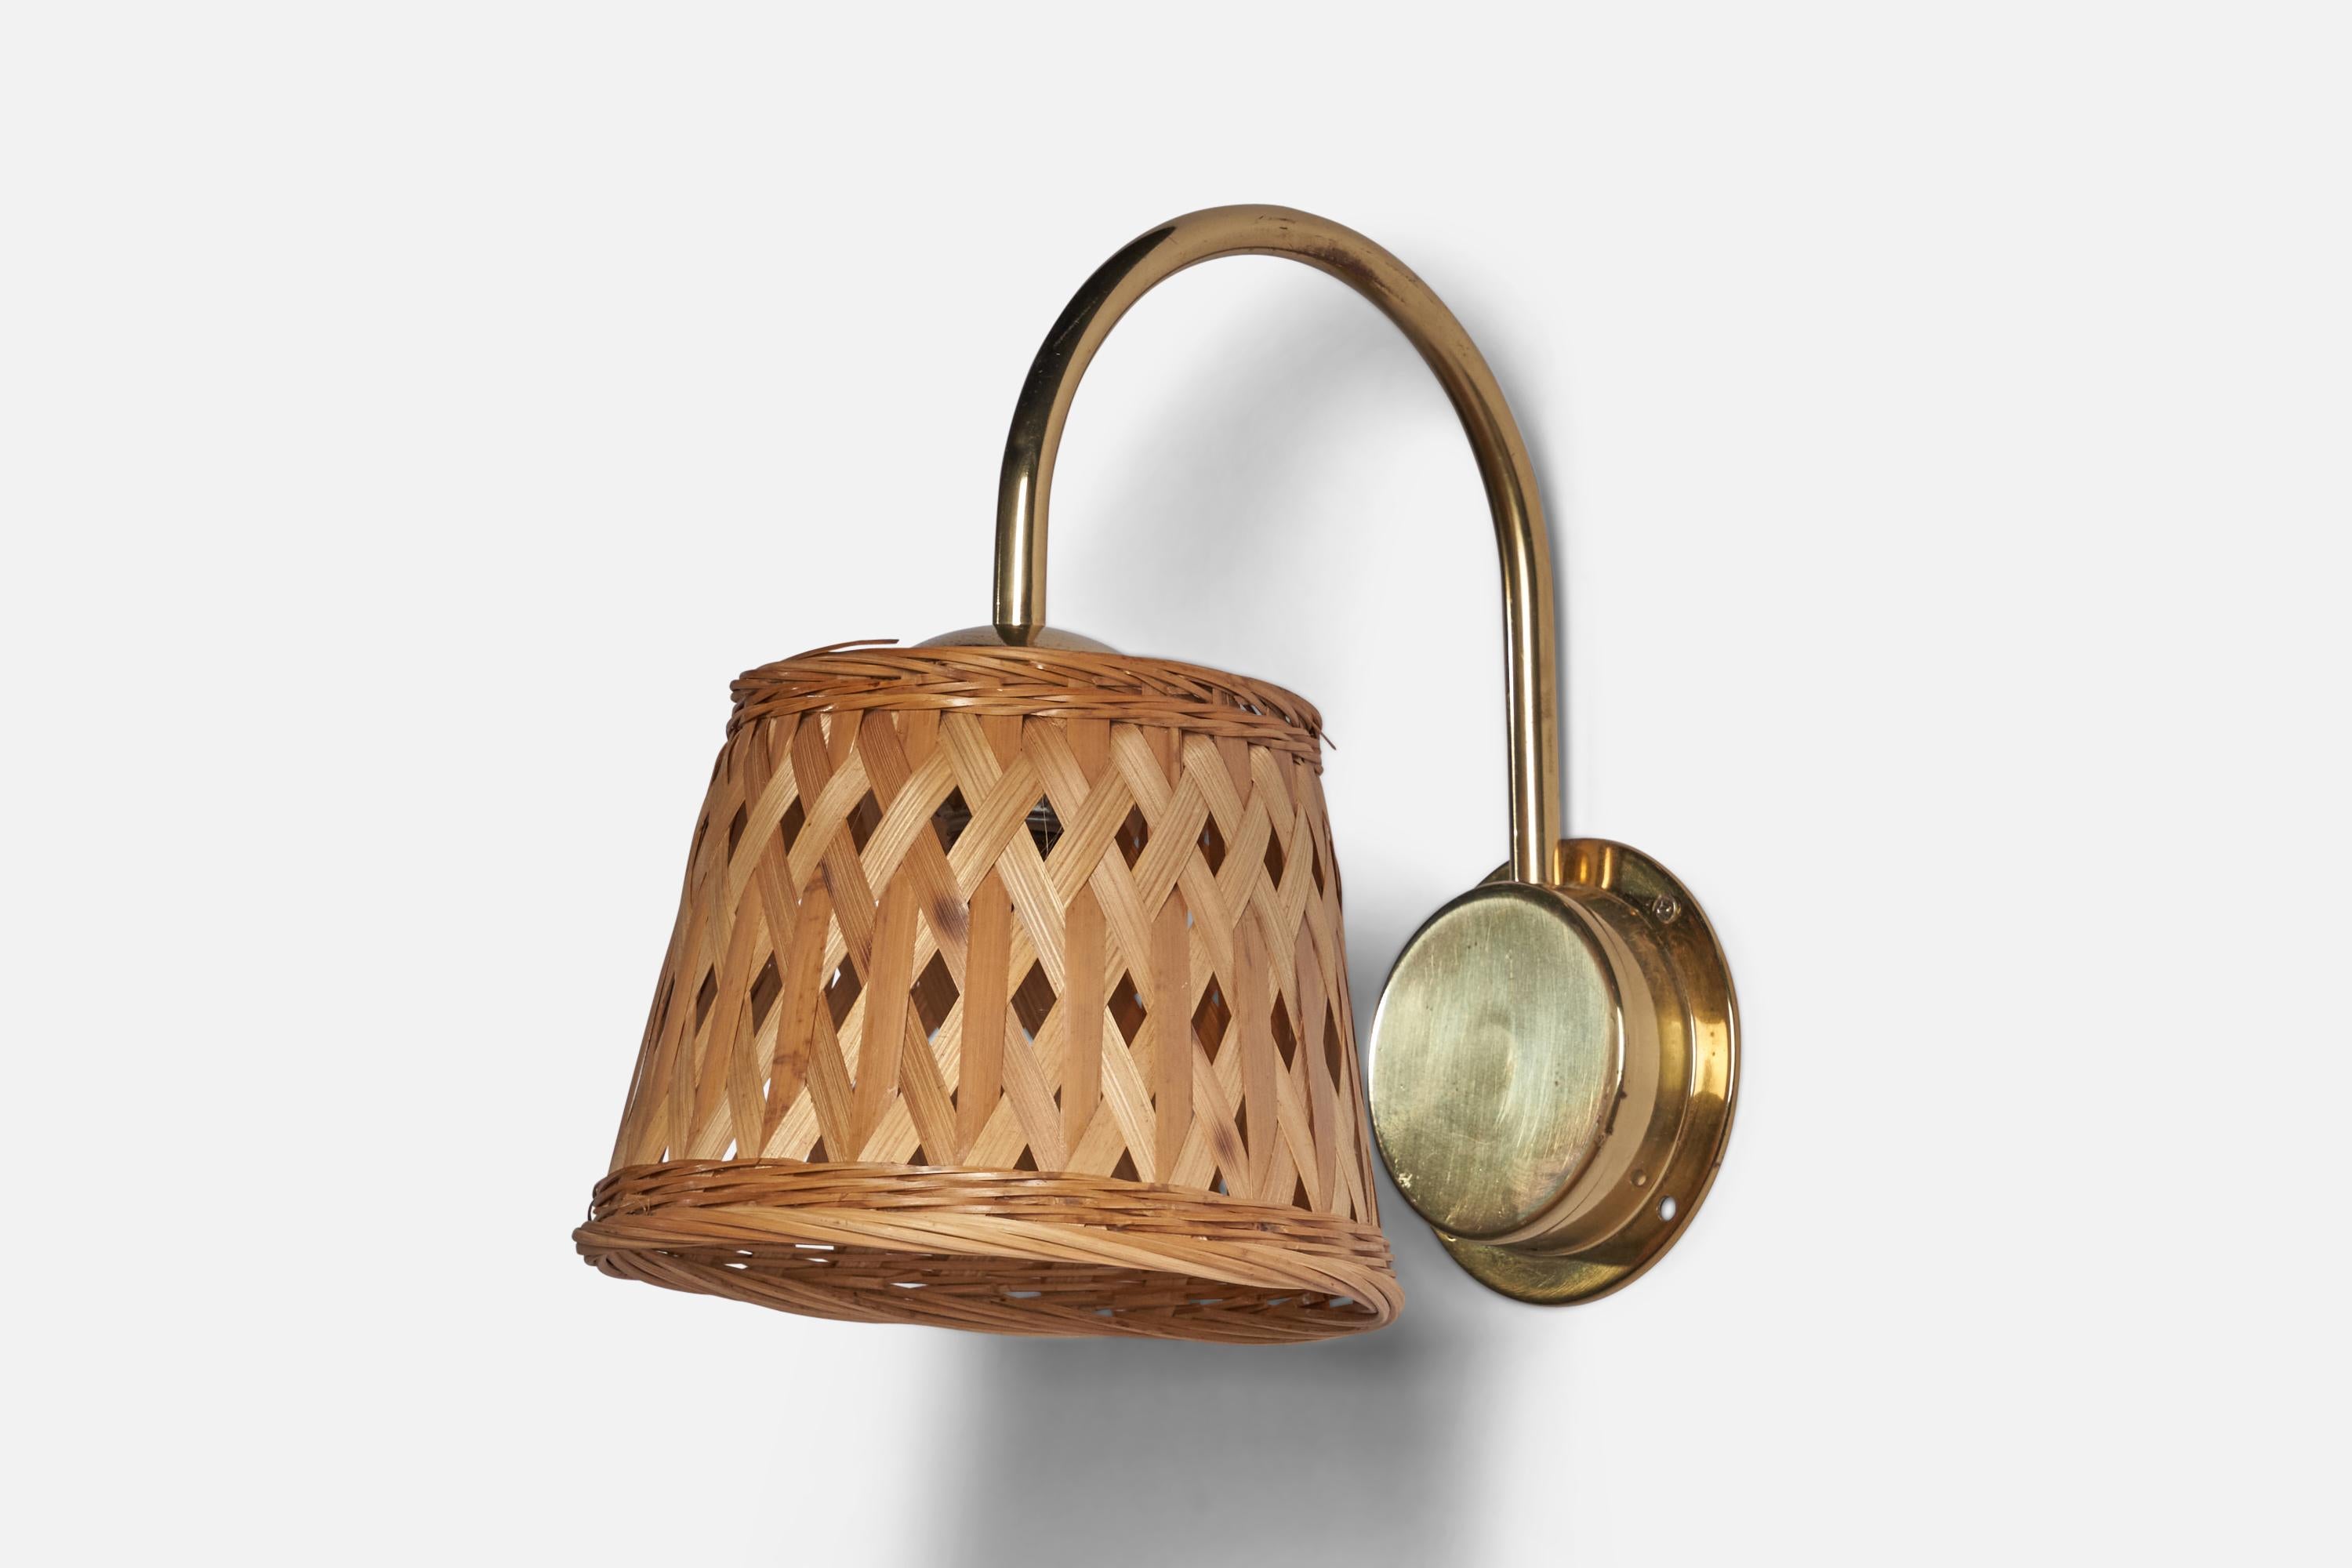 A brass and rattan wall light designed and produced in Sweden, c. 1970s.

Overall Dimensions (inches): 10” H x 7.25” W x 10” D
Back Plate Dimensions (inches): 4.25” Diameter
Bulb Specifications: E-14 Bulb
Number of Sockets: 1
All lighting will be